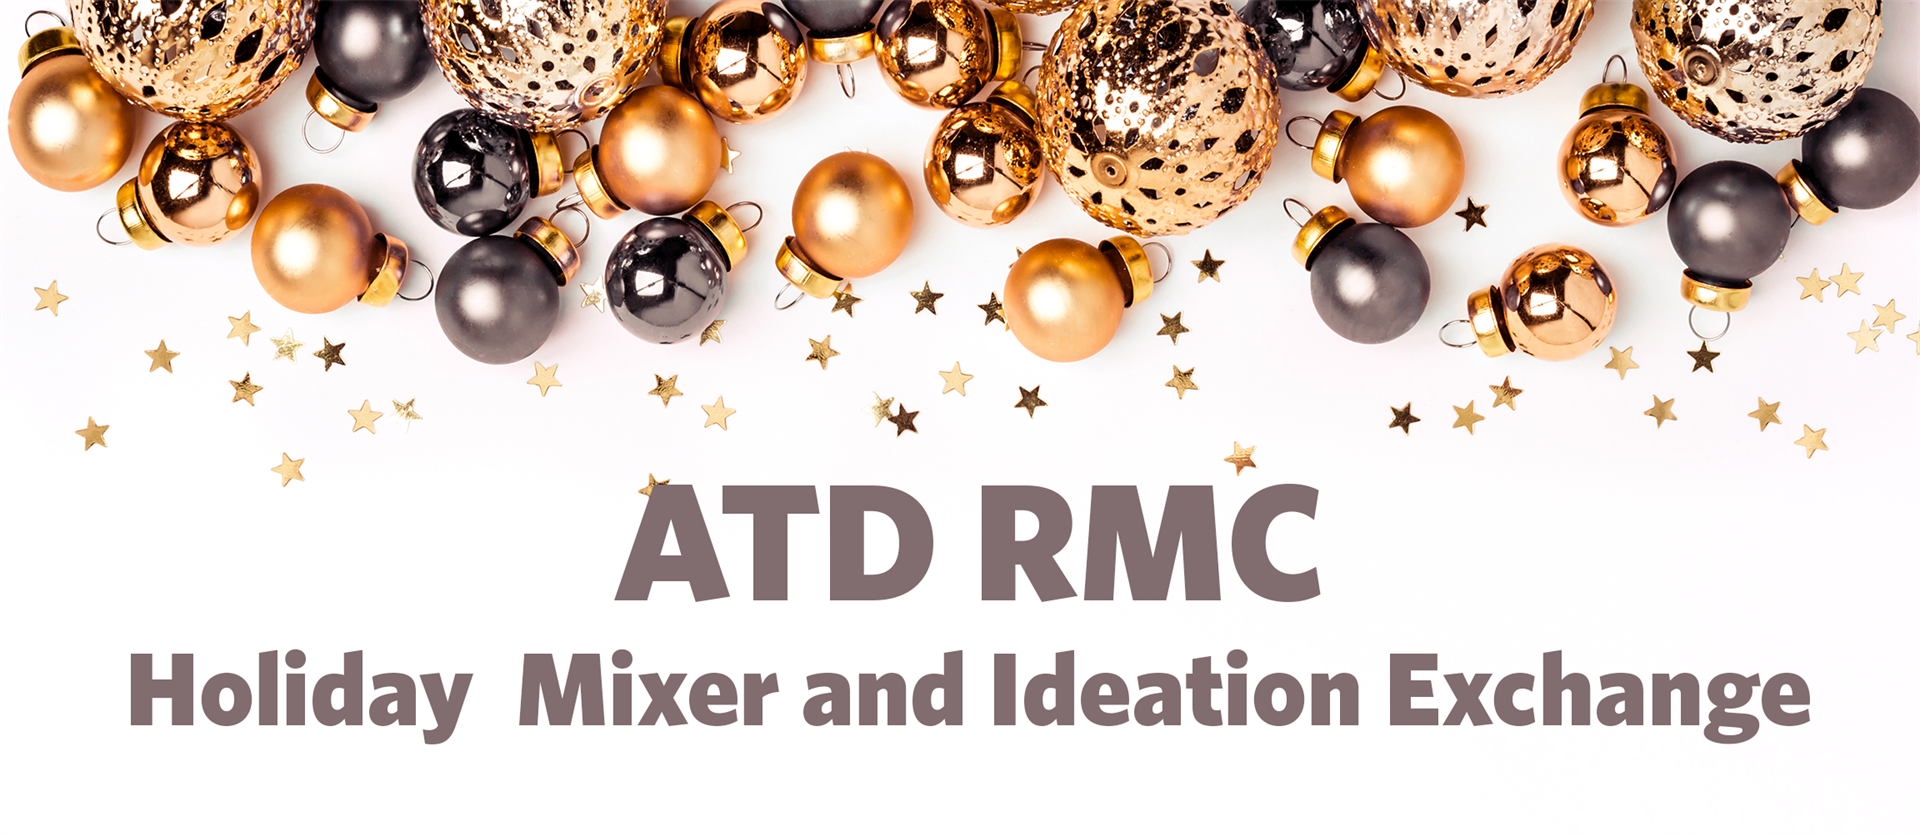 Gold and Silver round ball ornaments spread across a white background with gold and silver stars. ATD RMC Holiday Mixer and Ideation Exchange